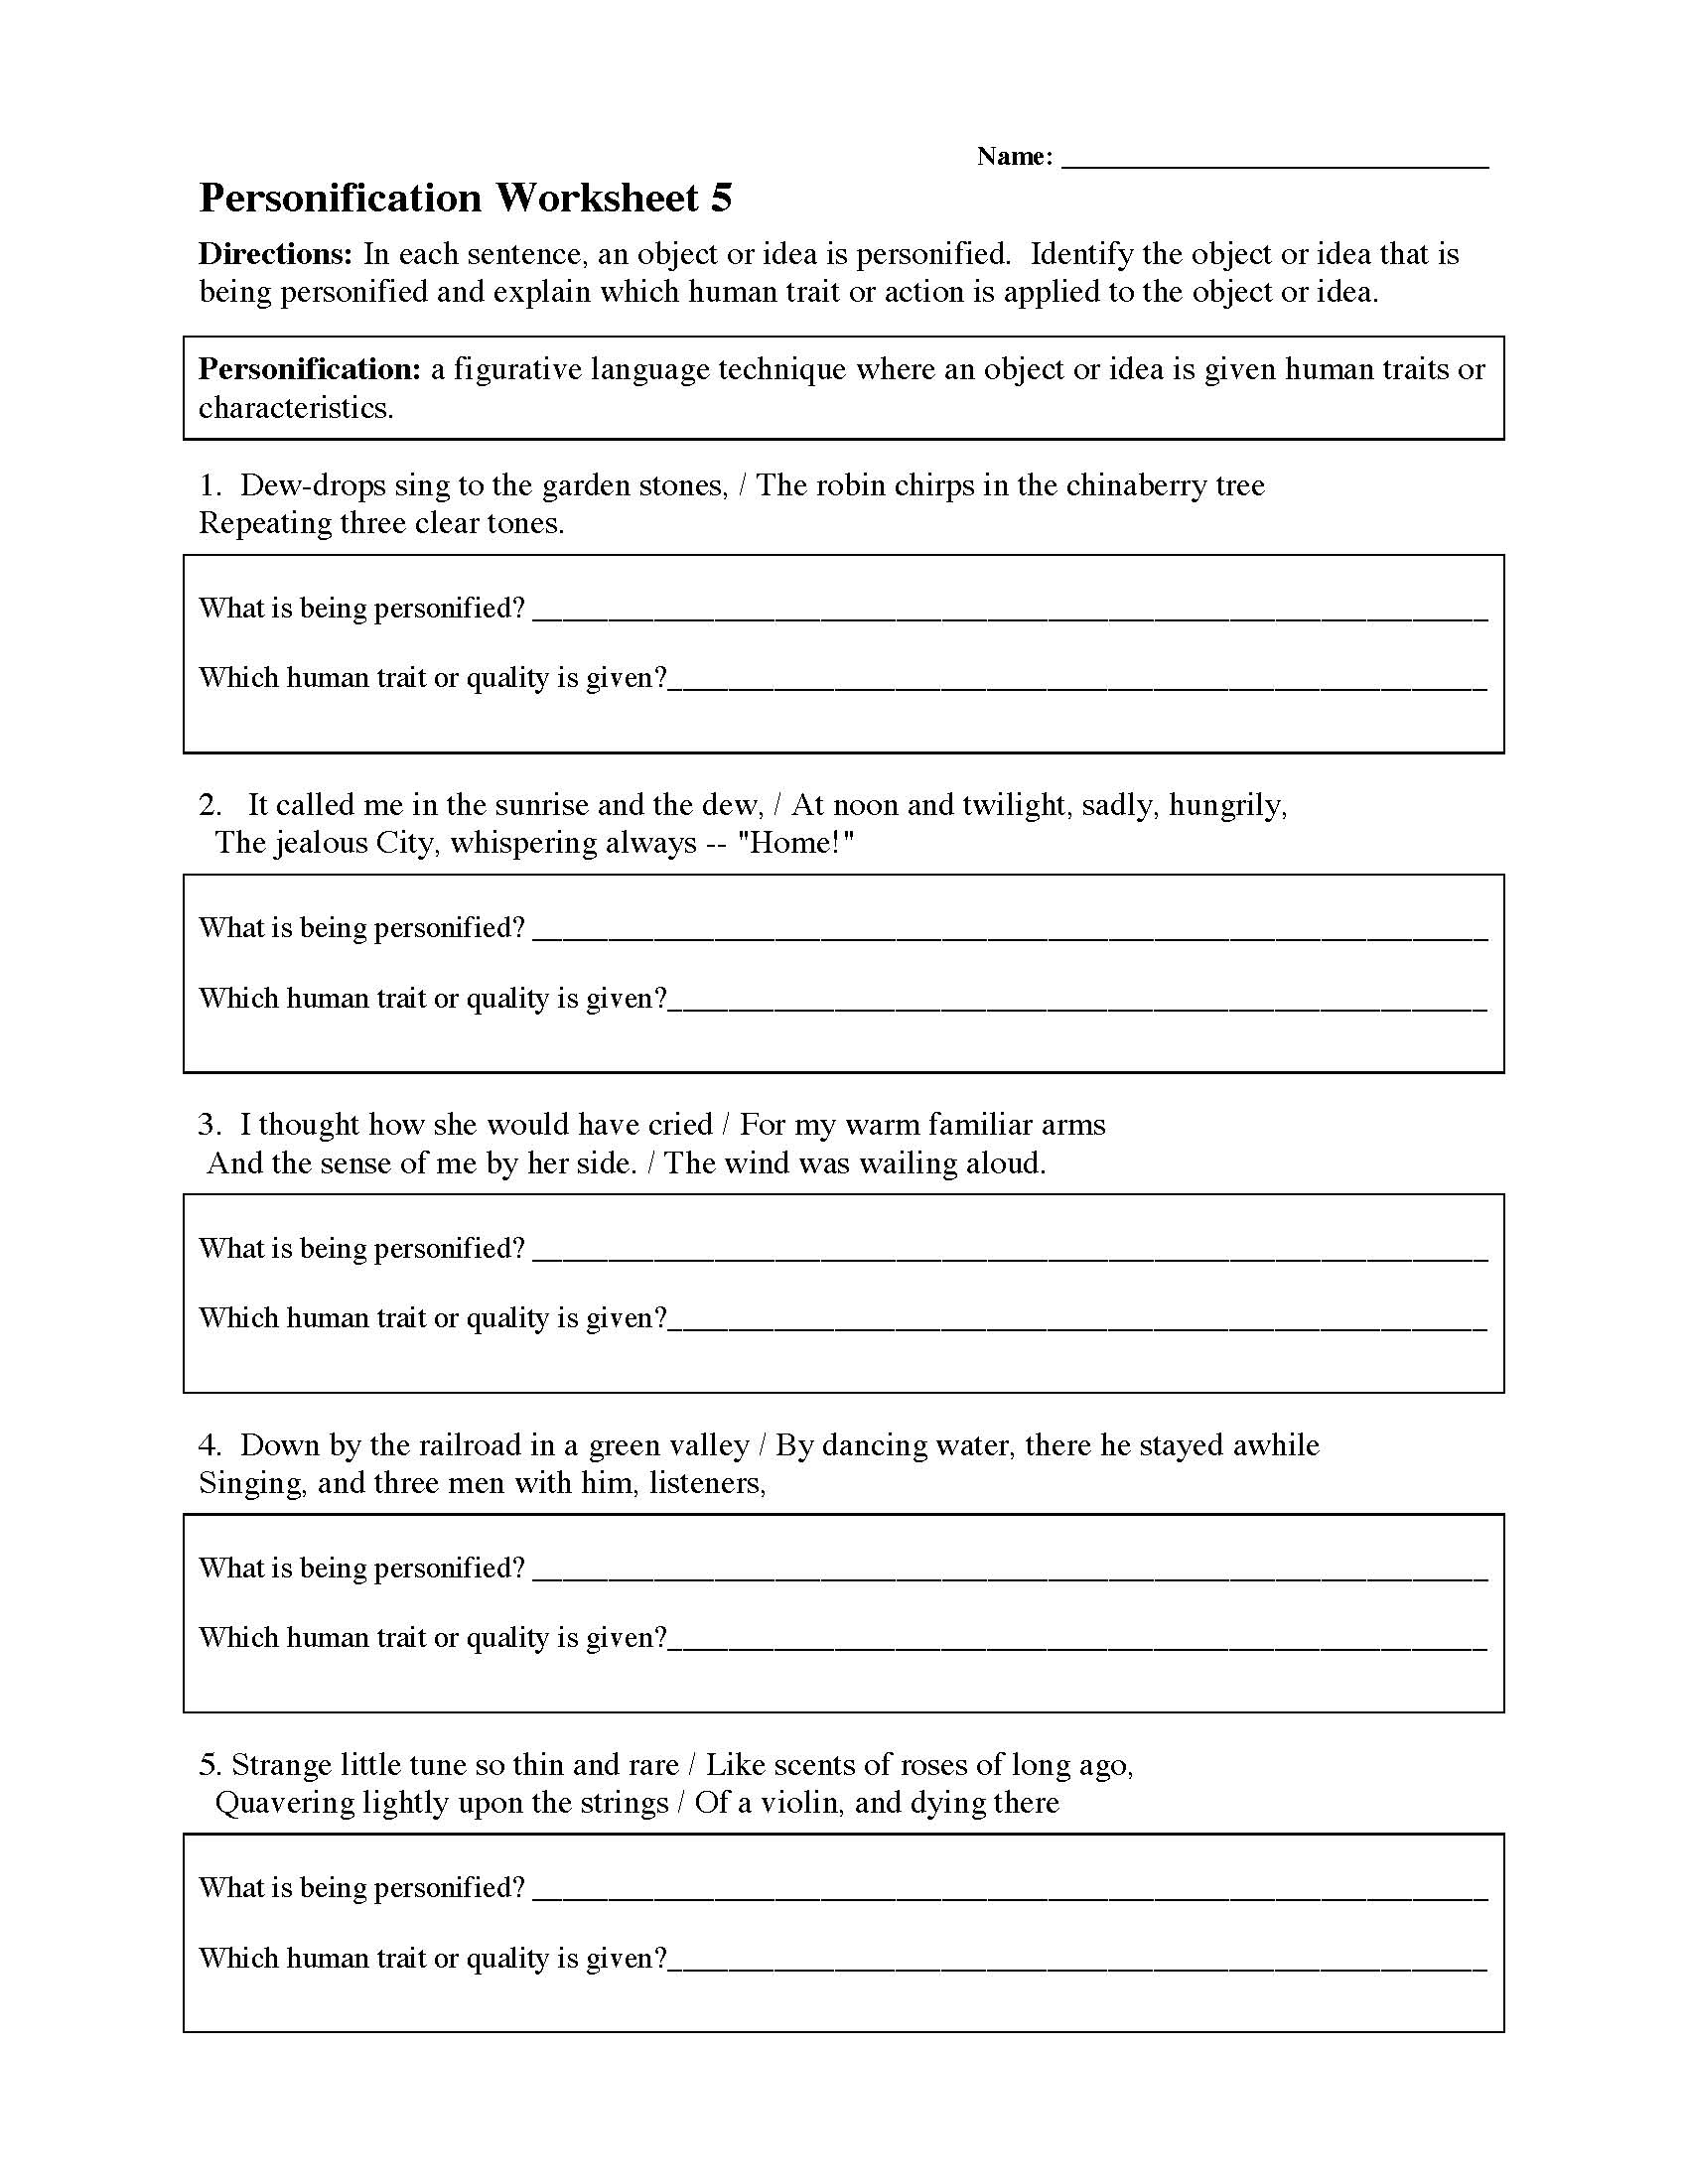 personification-worksheet-5-preview